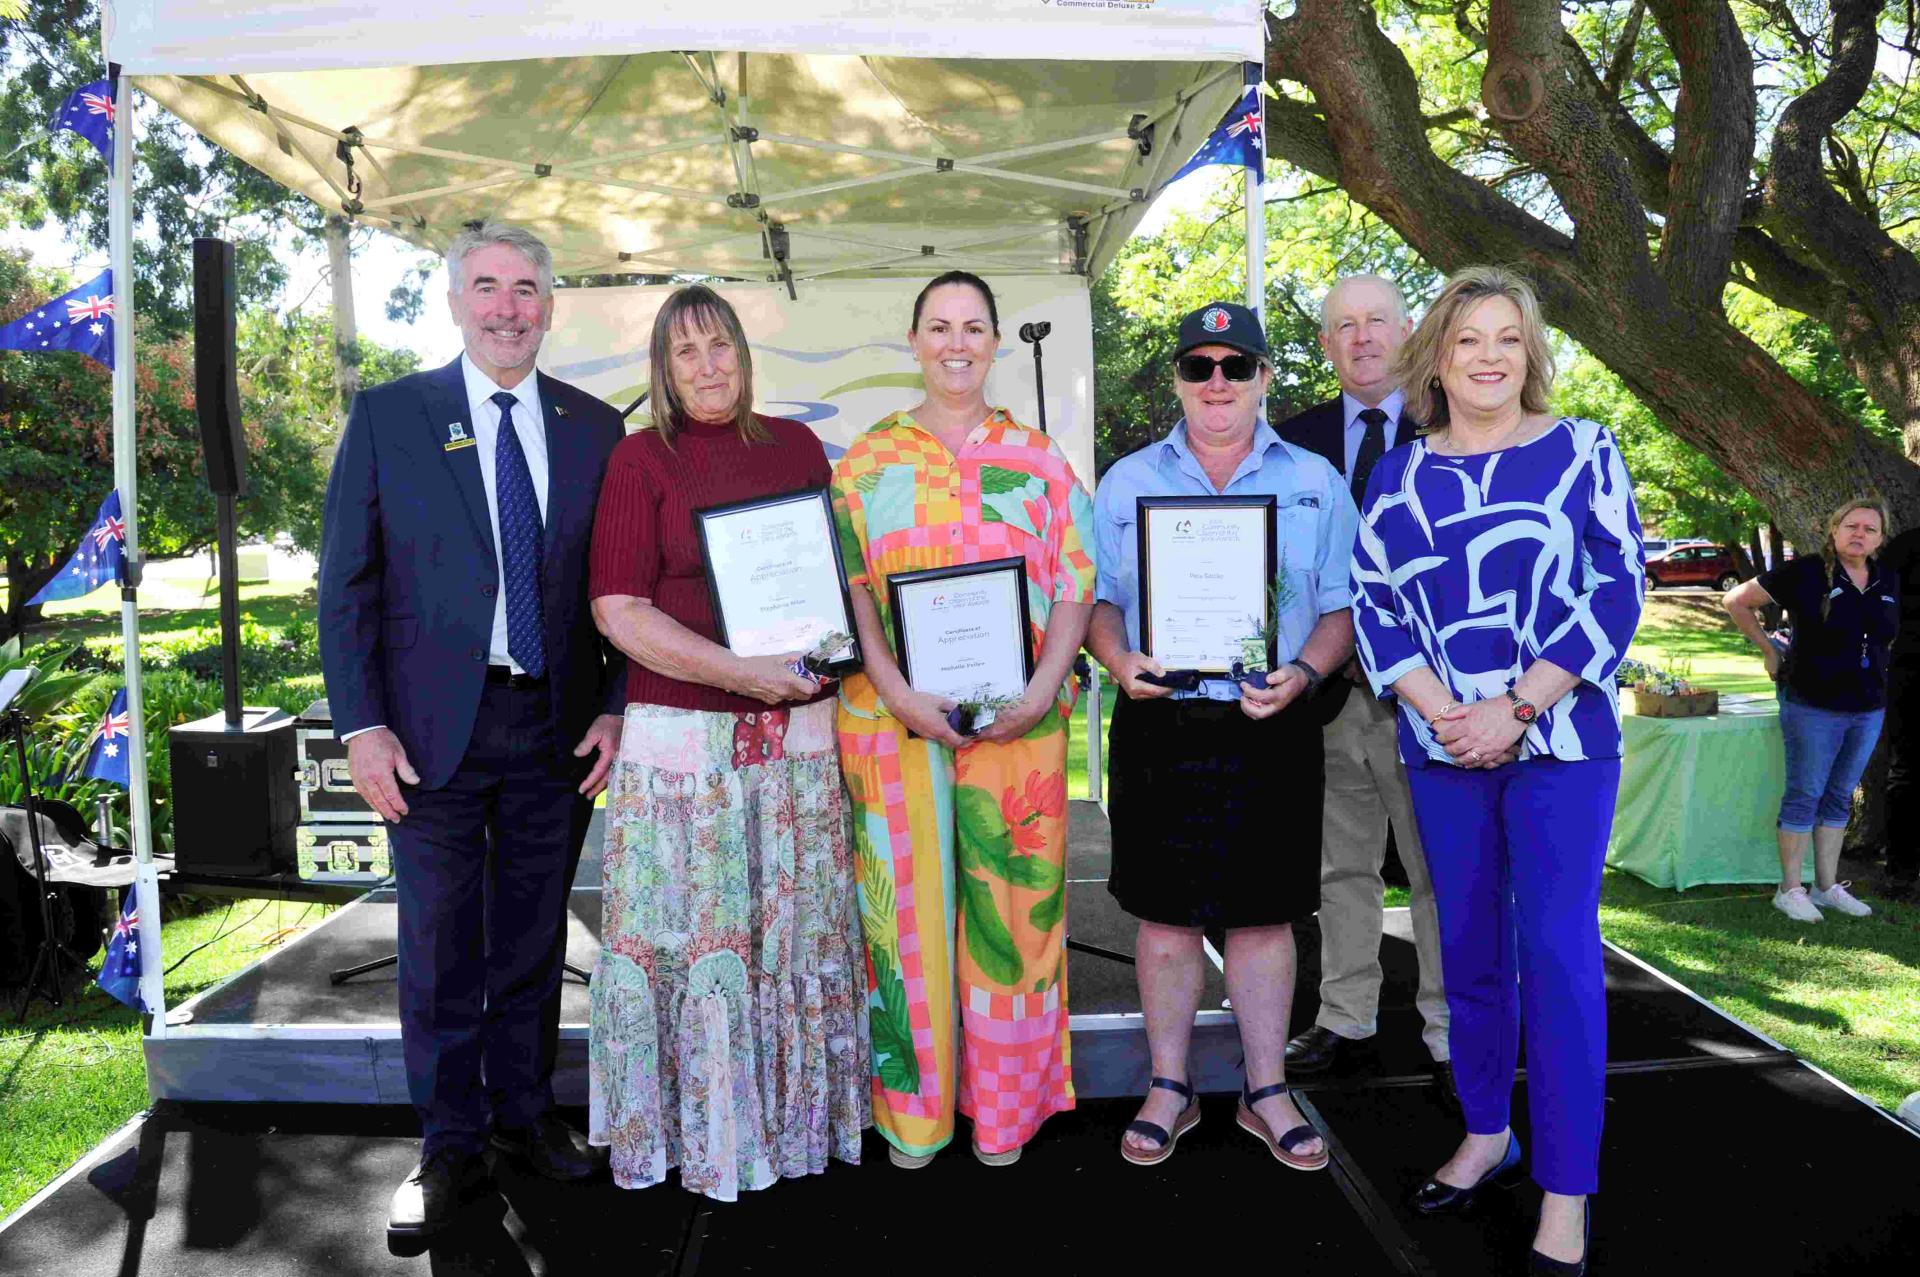 Shire of Murray Community Citizen of the Year Awards